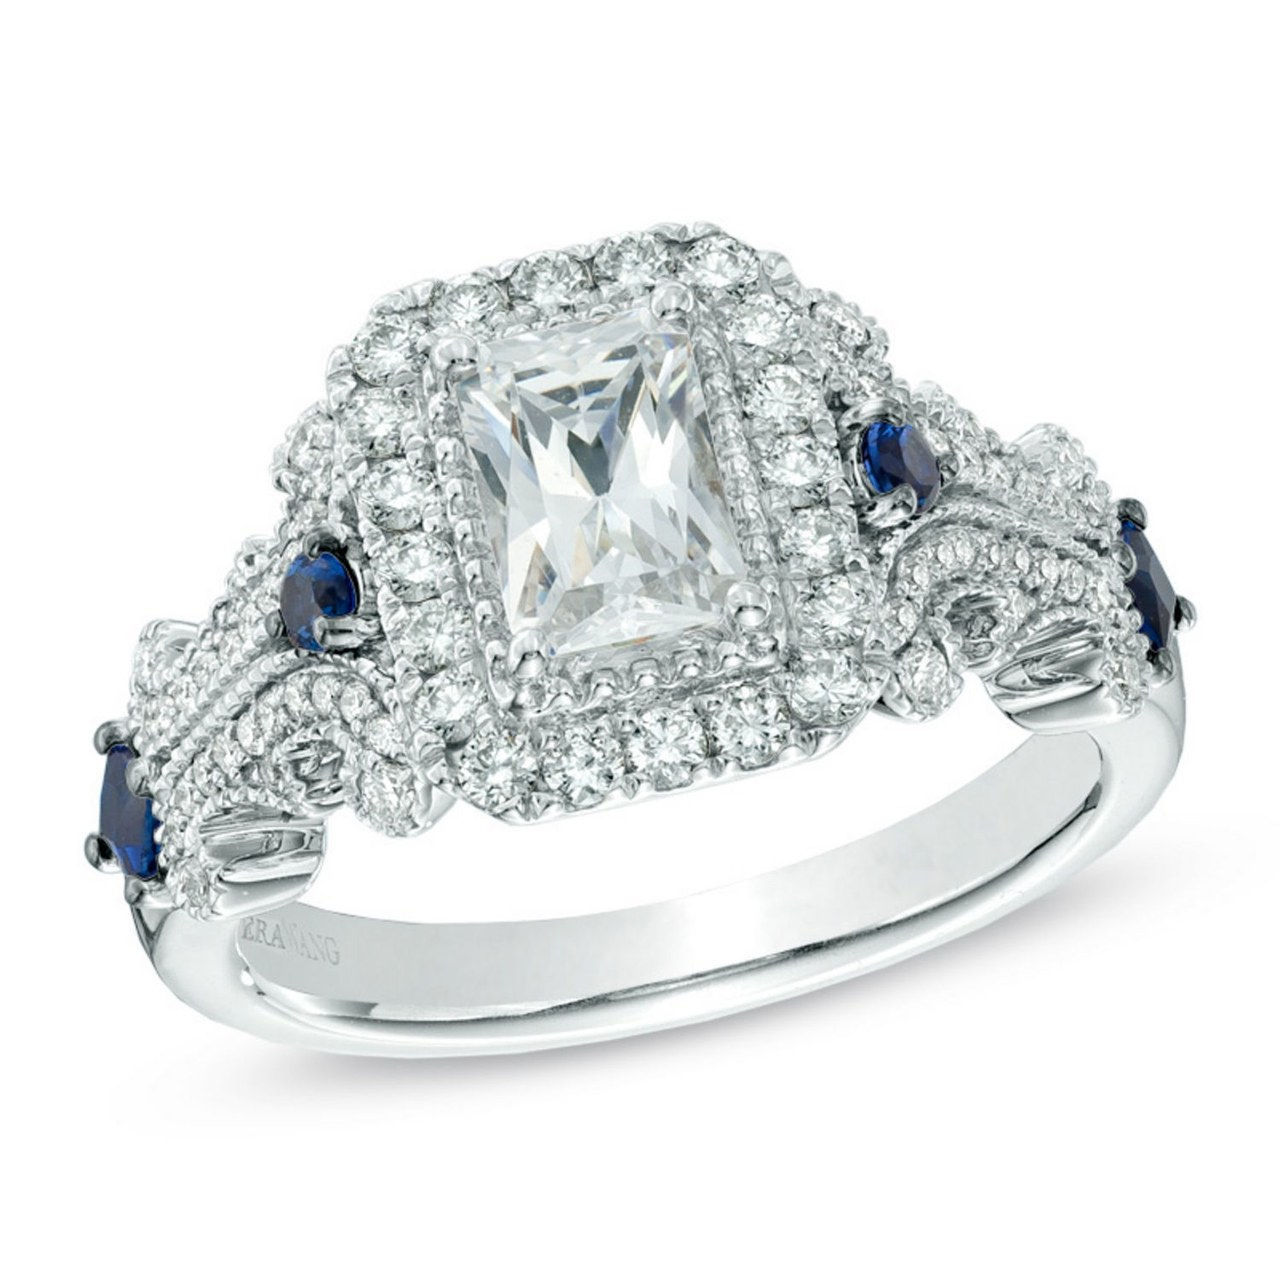 2a sapphire engagement rings 1026 courtesy vera wang love